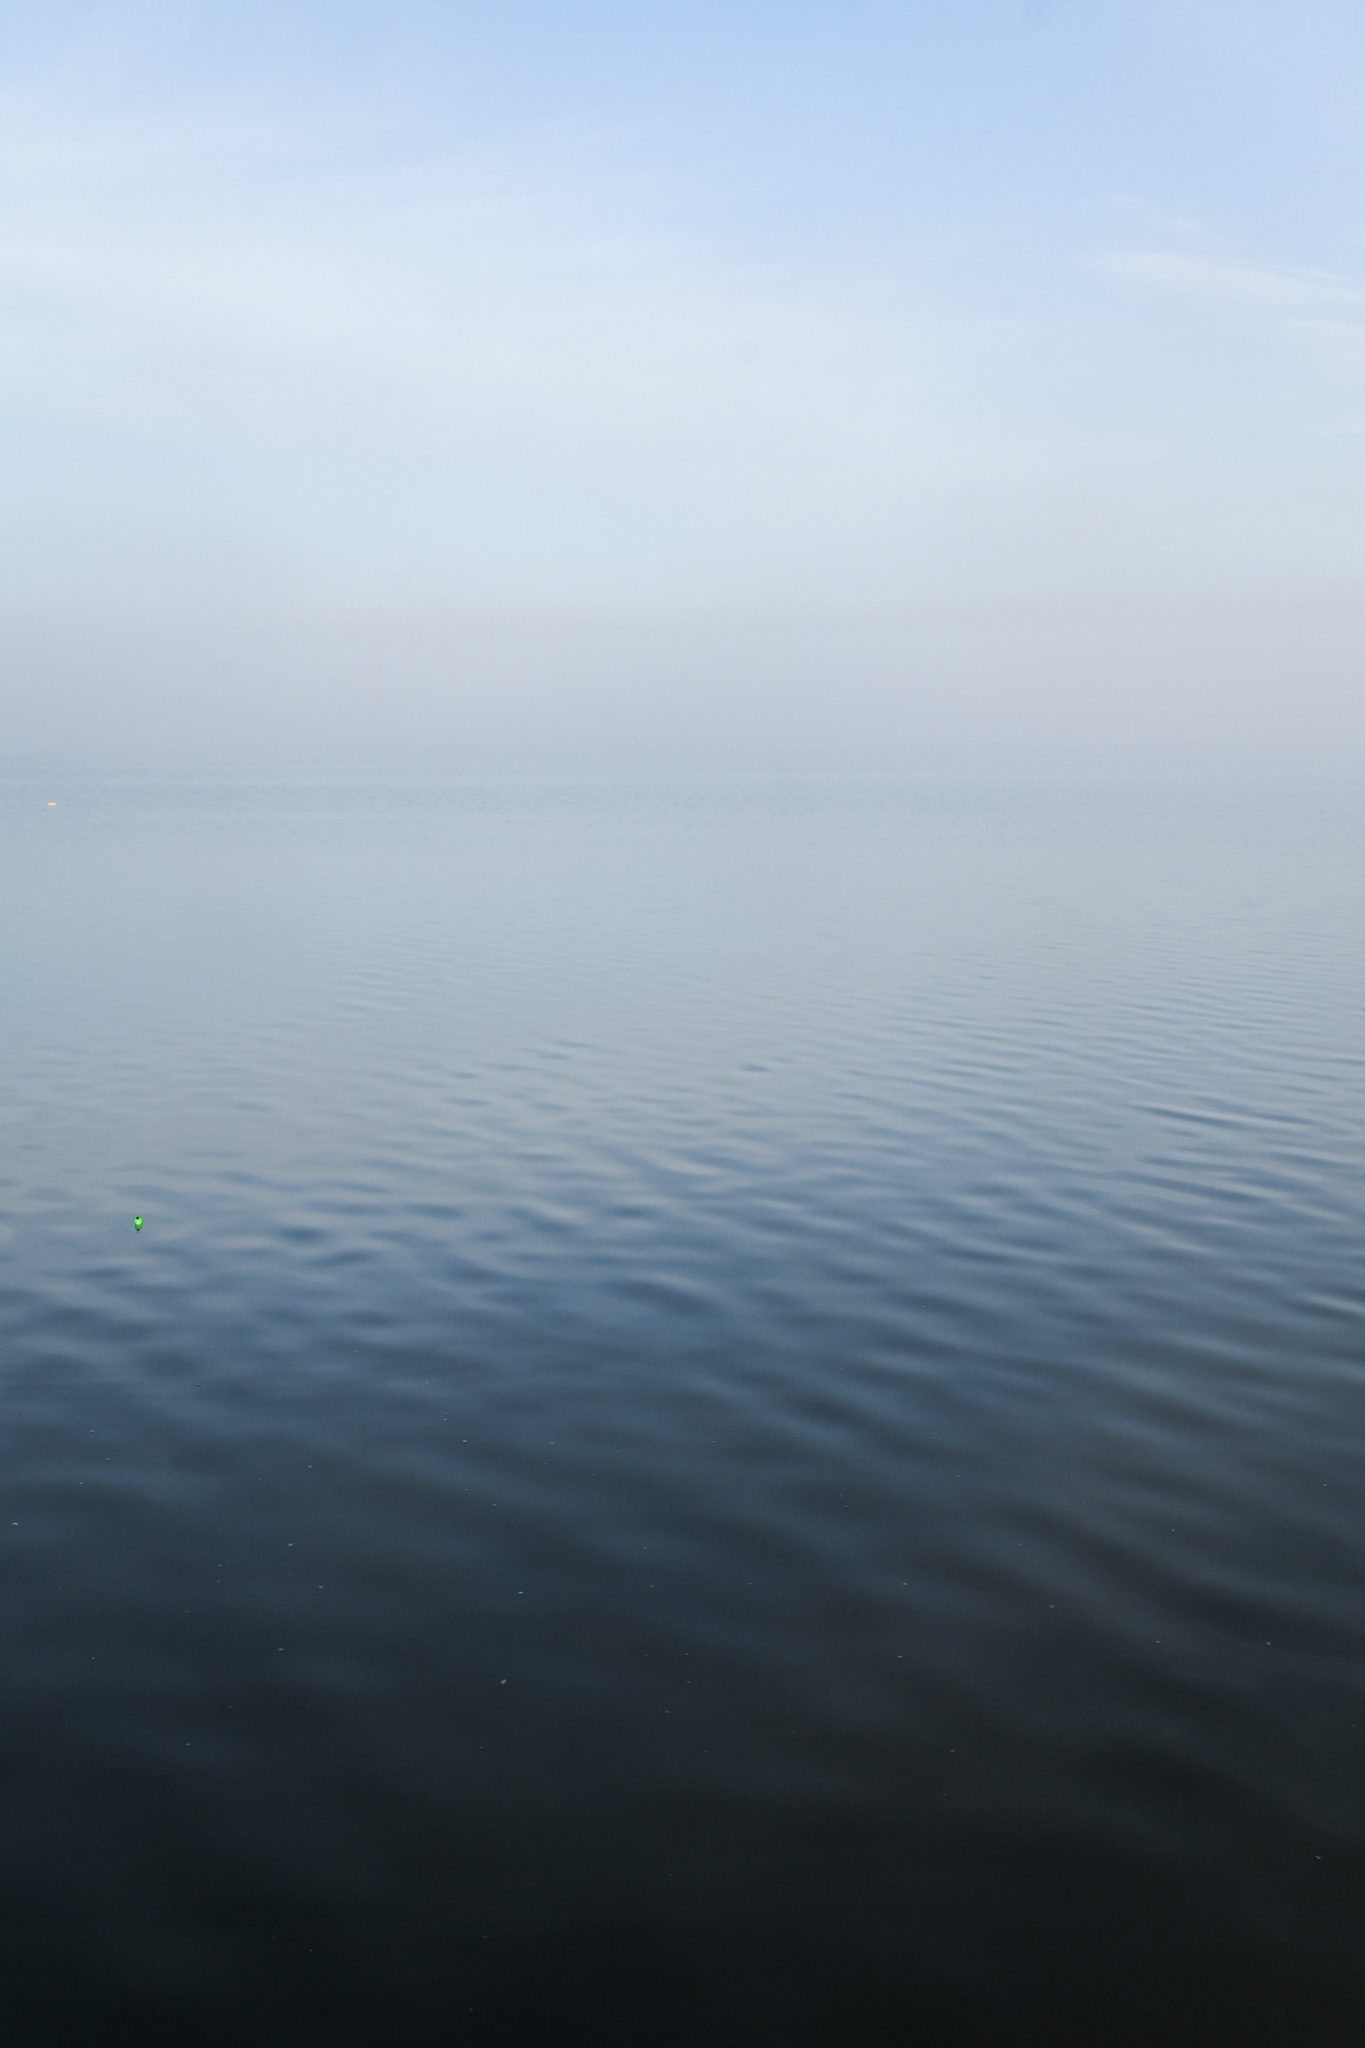 Blurry lines between early morning sky, dense fog, and calm water